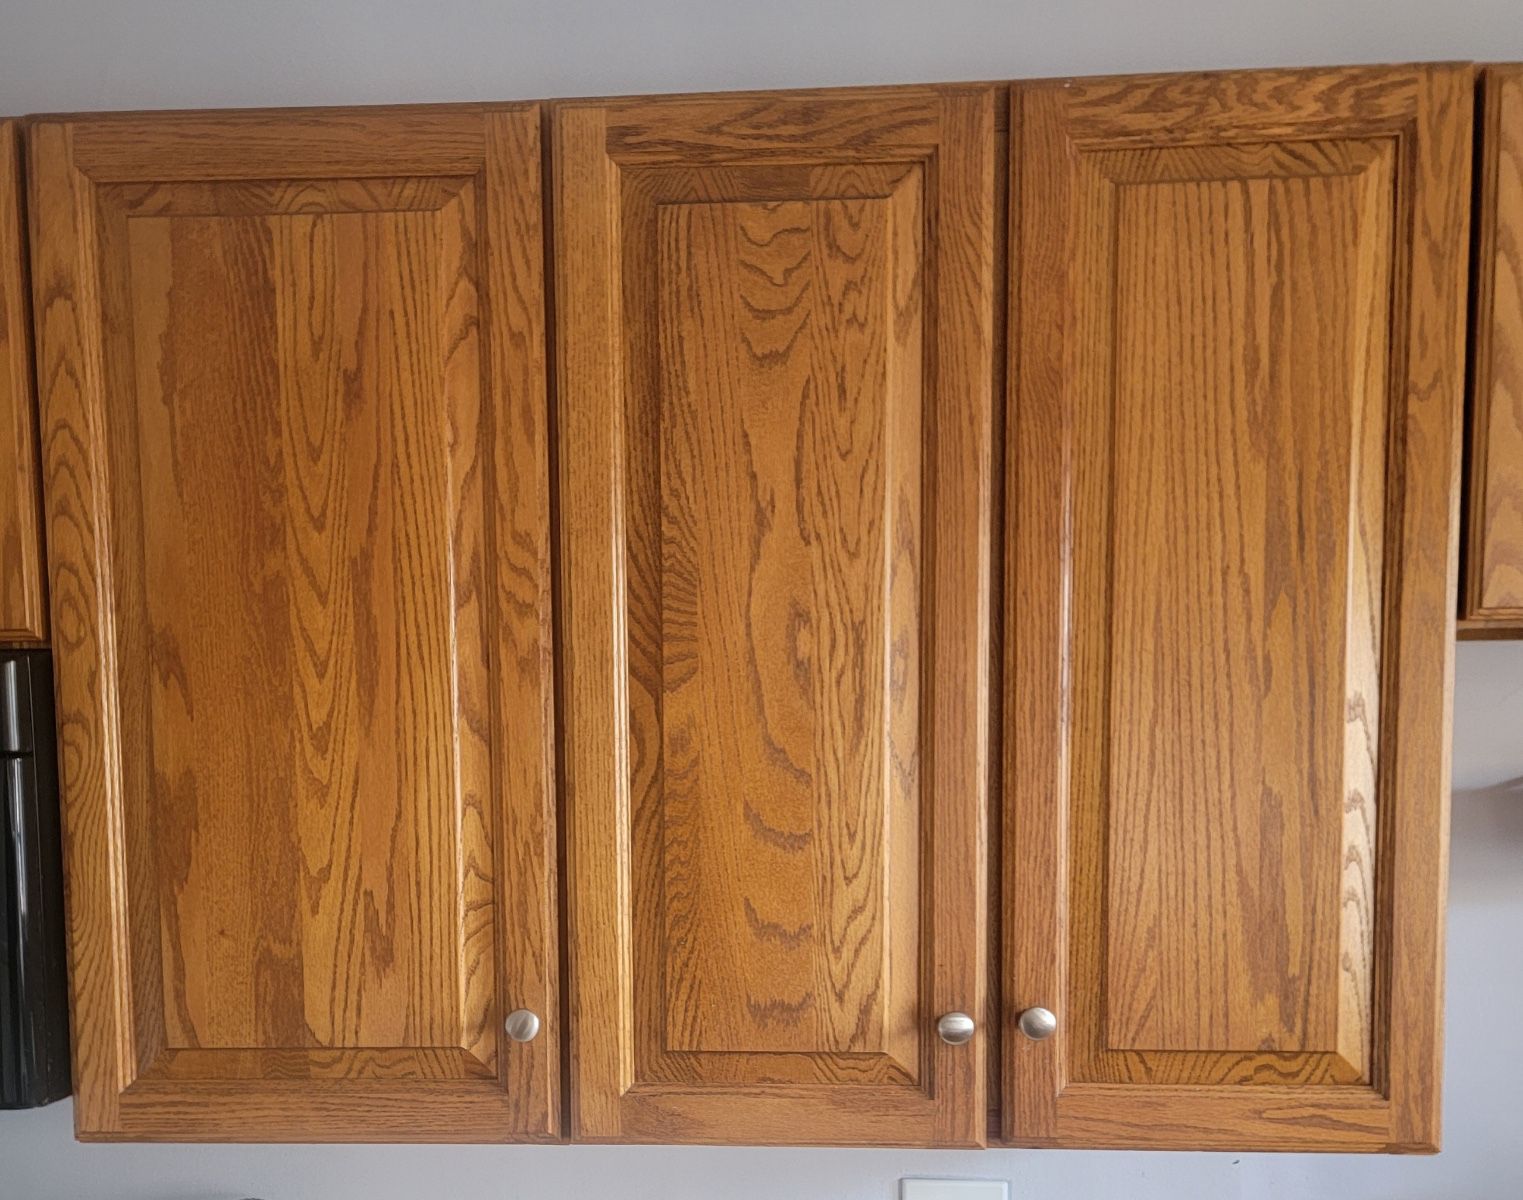 Wall Kitchen Cabinet Set - With Handles And Adjustable Hinges - Medium Oak